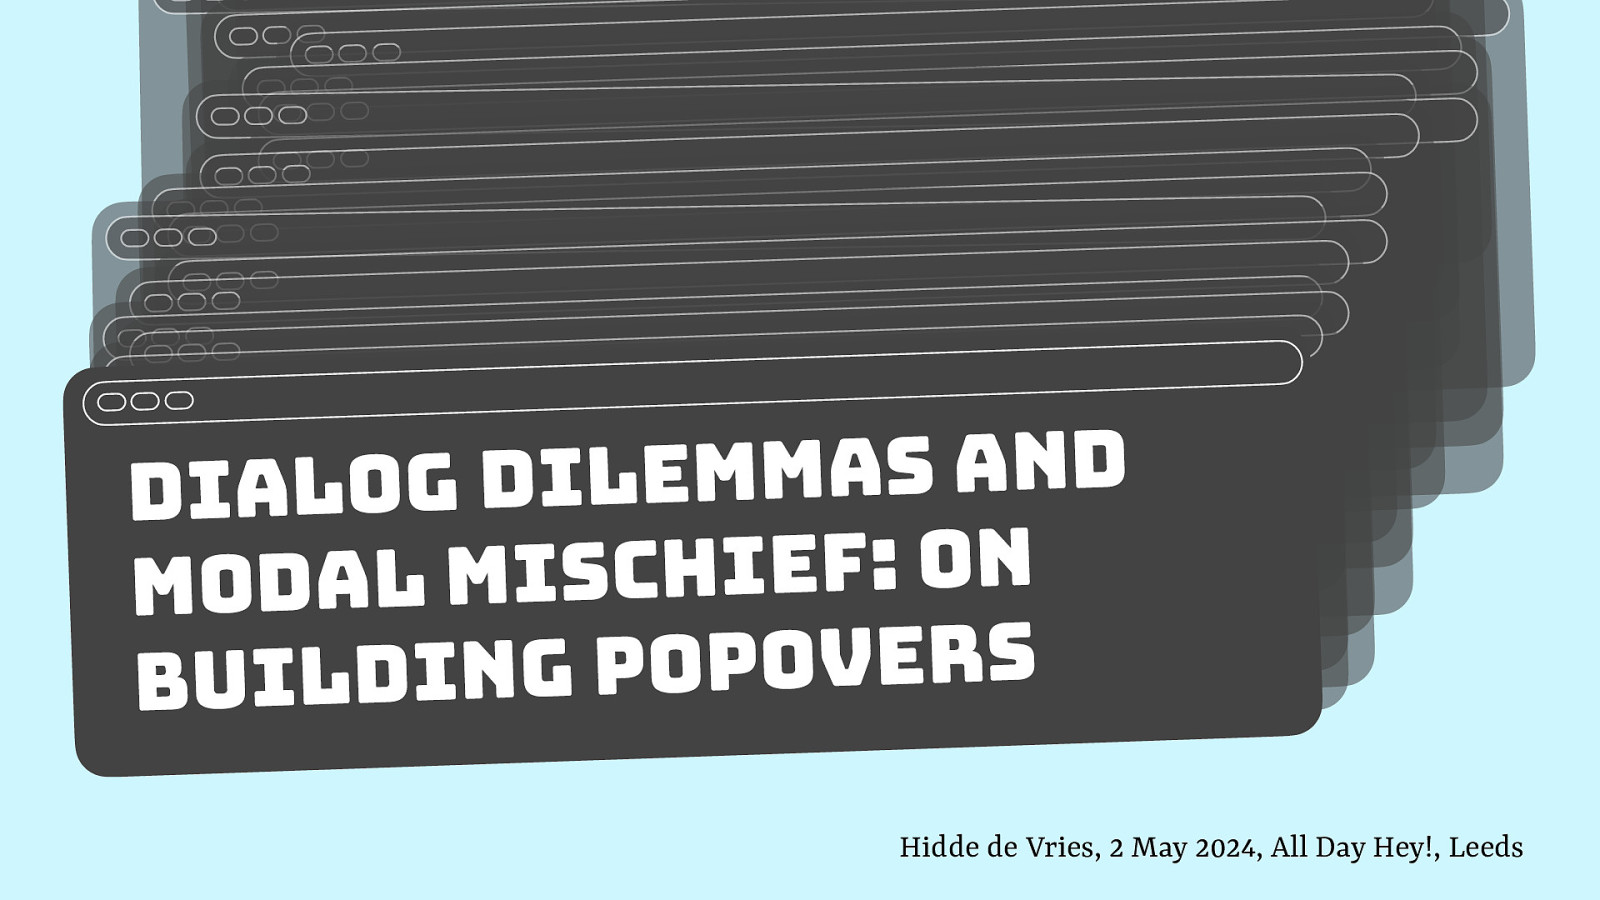 Dialog dilemmas and modal mischief: on building popovers